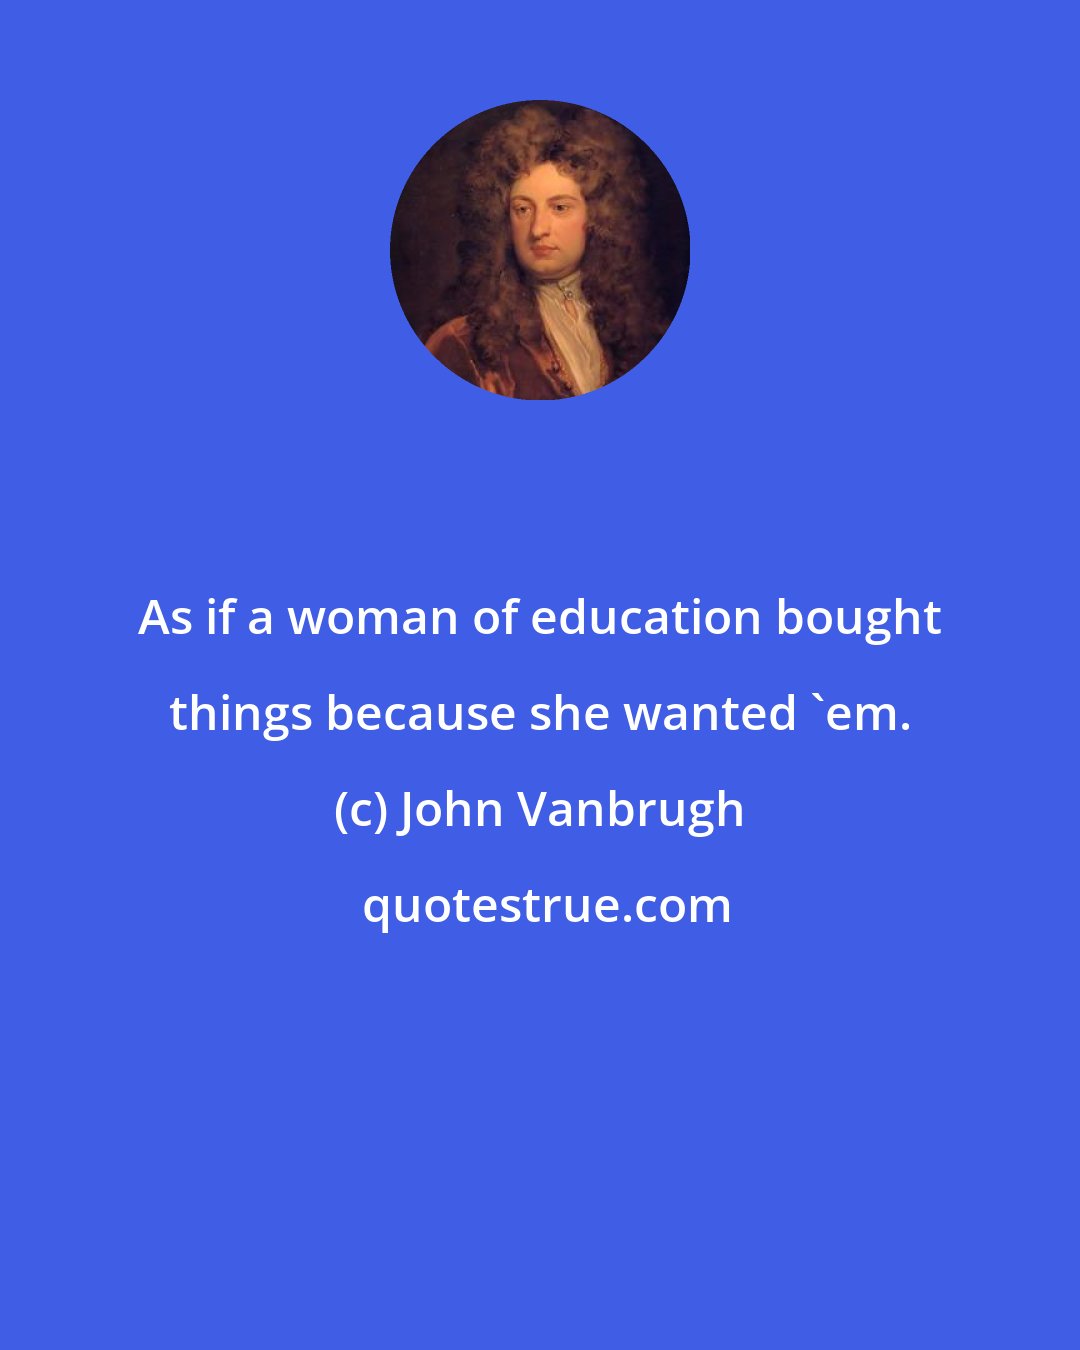 John Vanbrugh: As if a woman of education bought things because she wanted 'em.